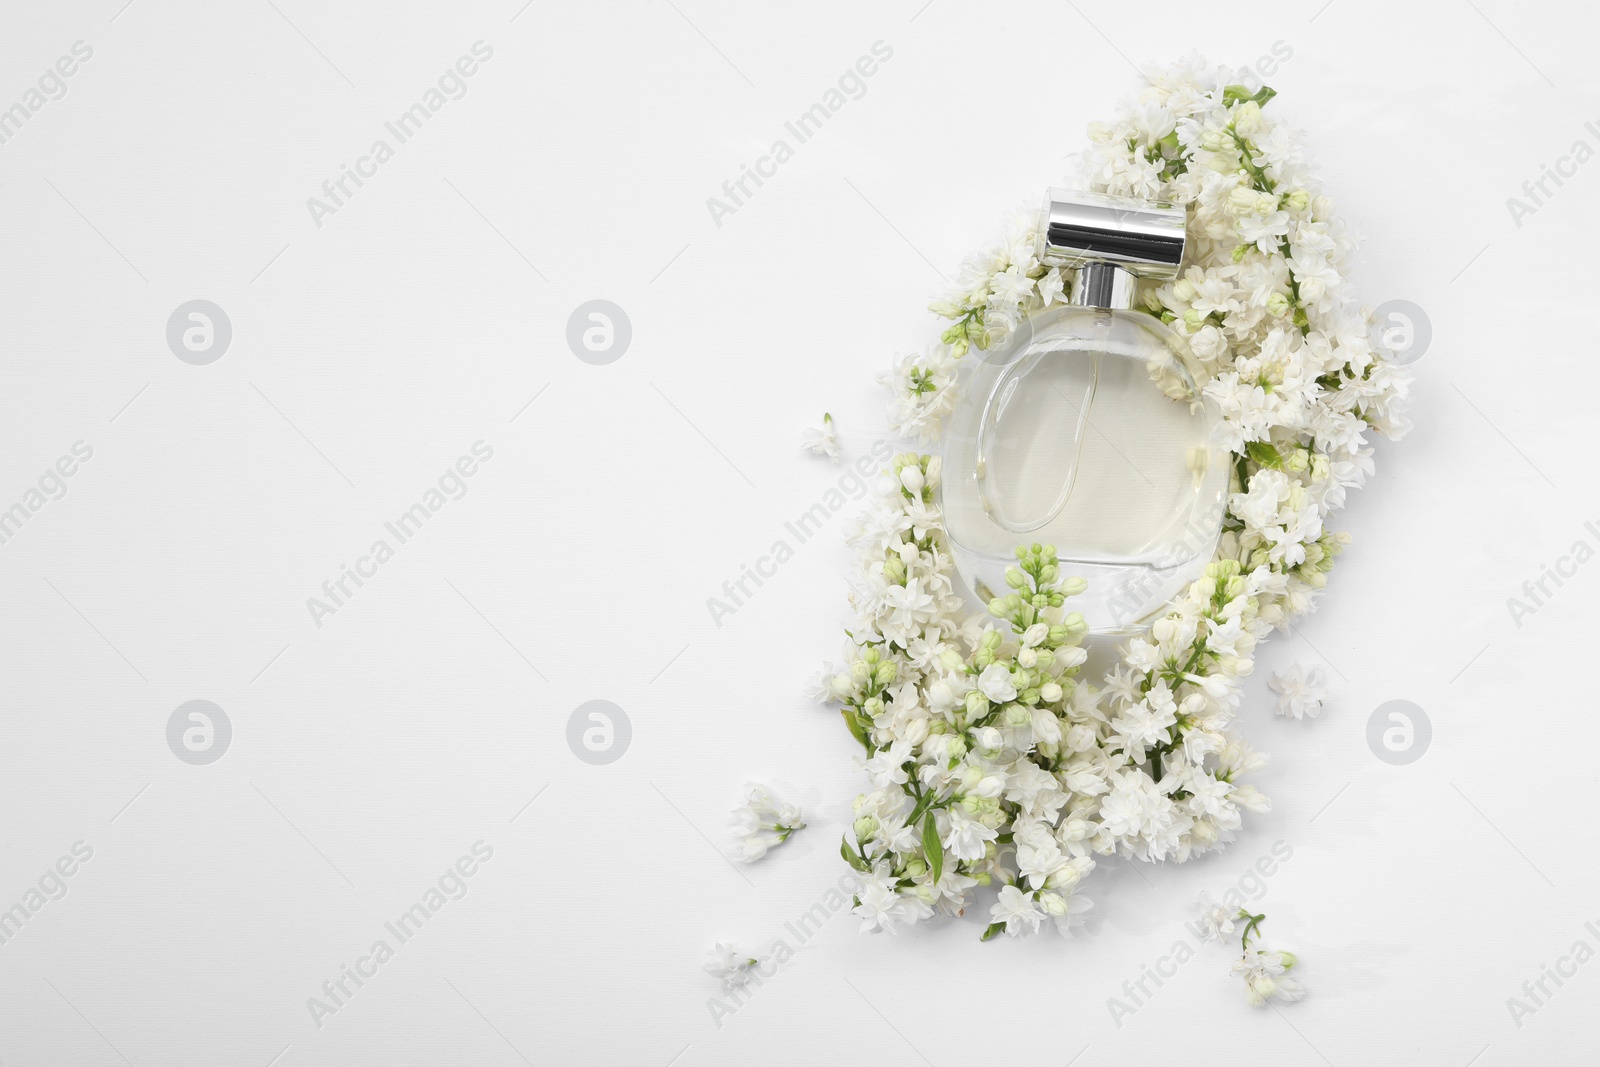 Photo of Luxury perfume and floral decor on white background, top view. Space for text